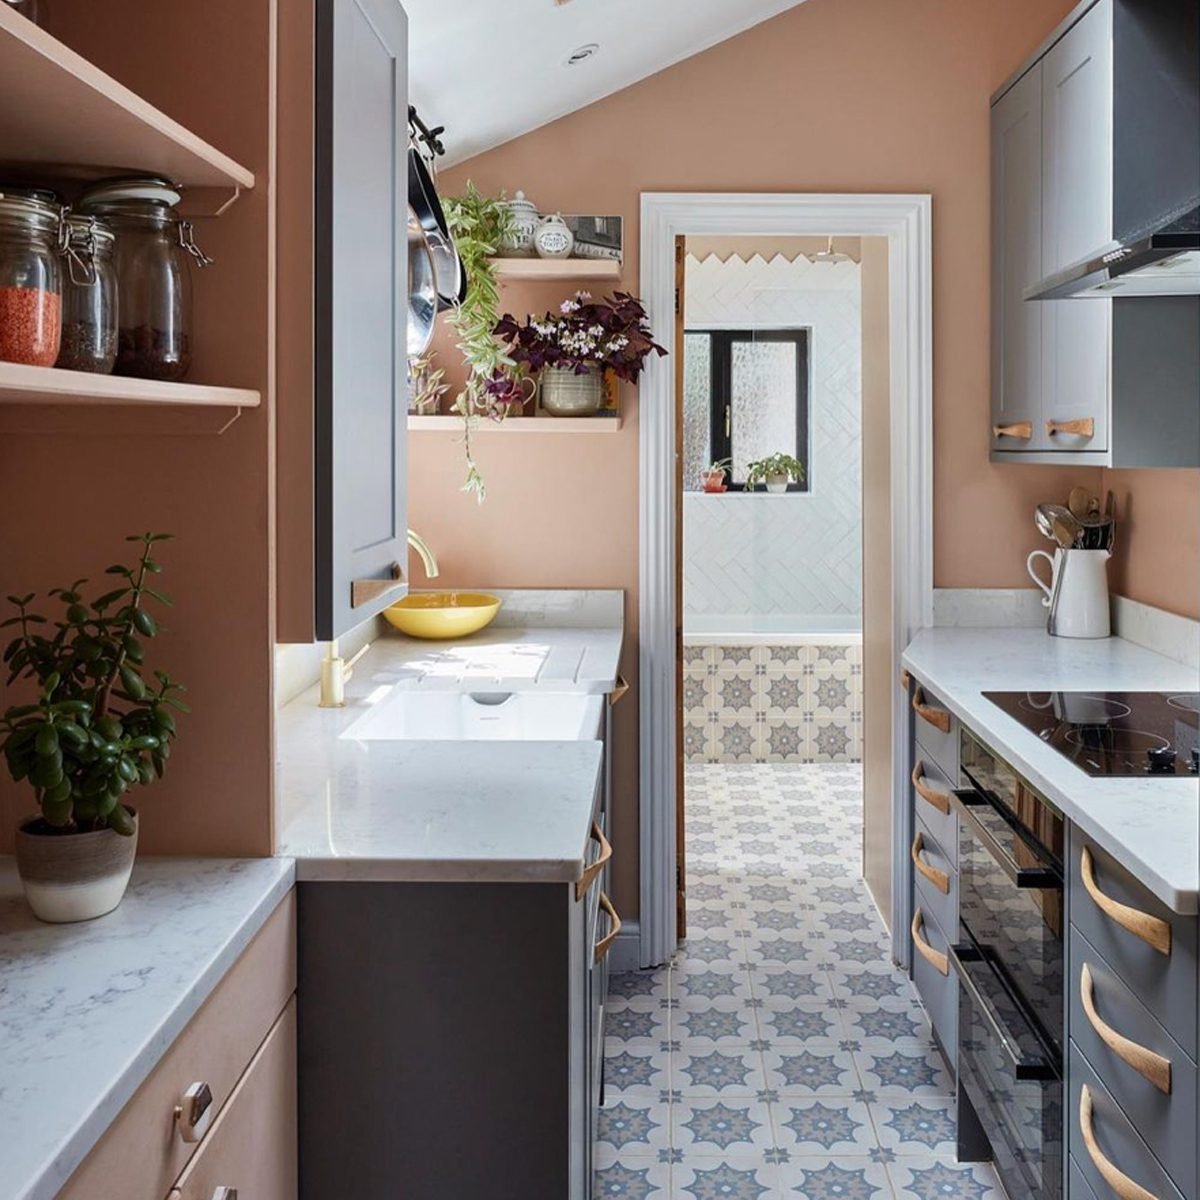 10 Paint Colors and Trends for Small Kitchens